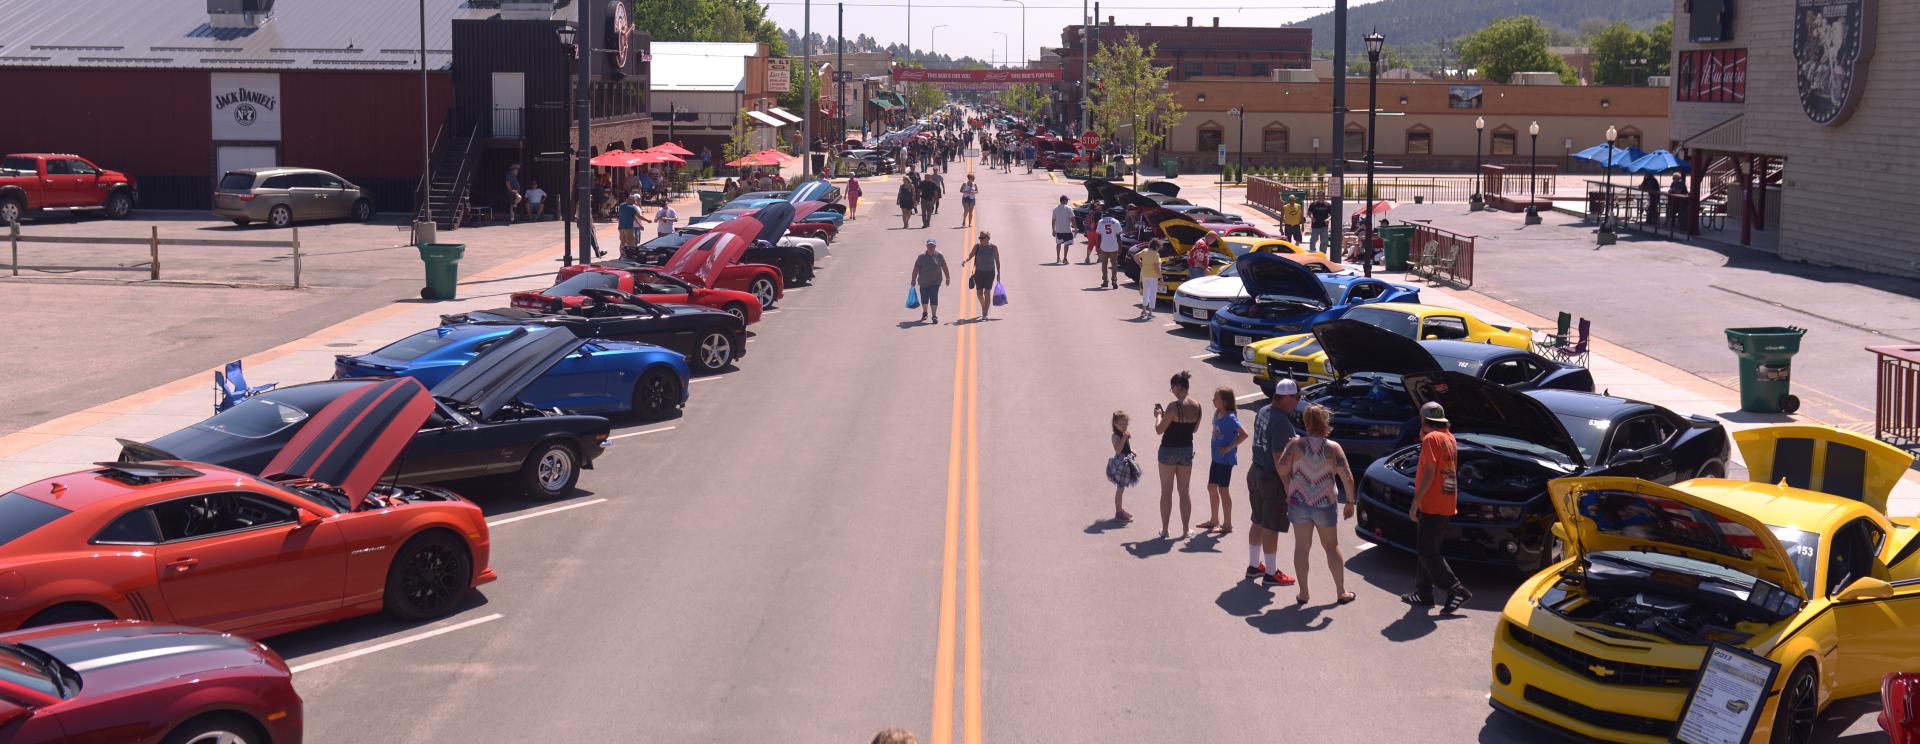 City of Sturgis - RALLY & EVENTS!